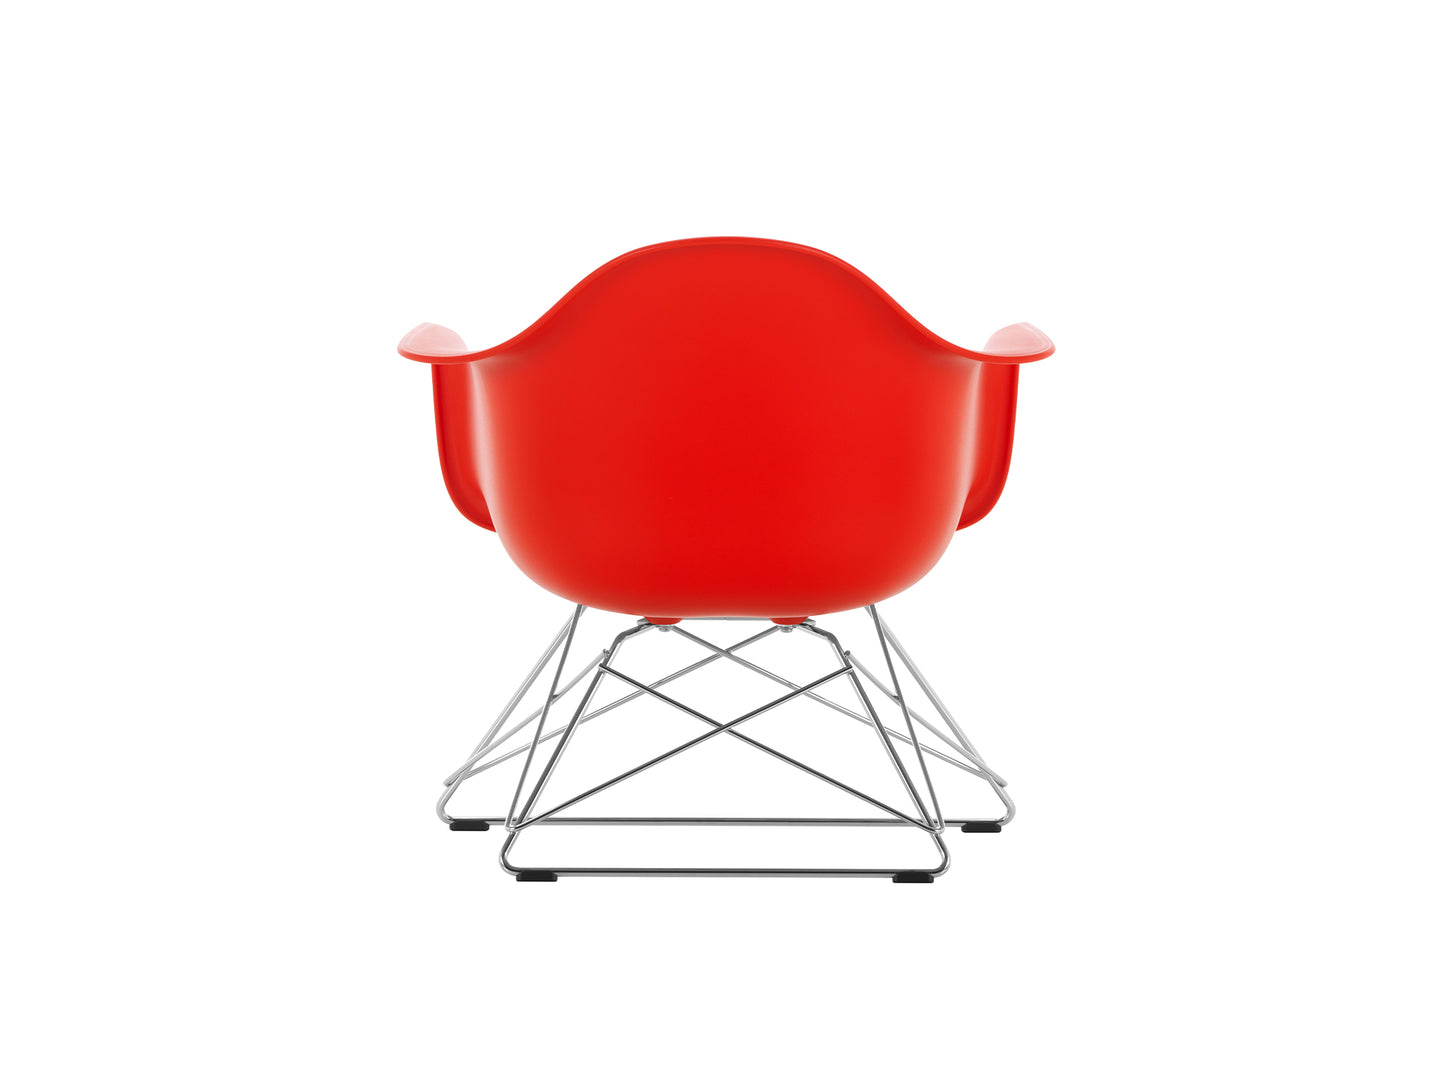 Eames Plastic Armchair LAR by Vitra - Poppy Red 03 Shell / Chrome-Plated Steel Base